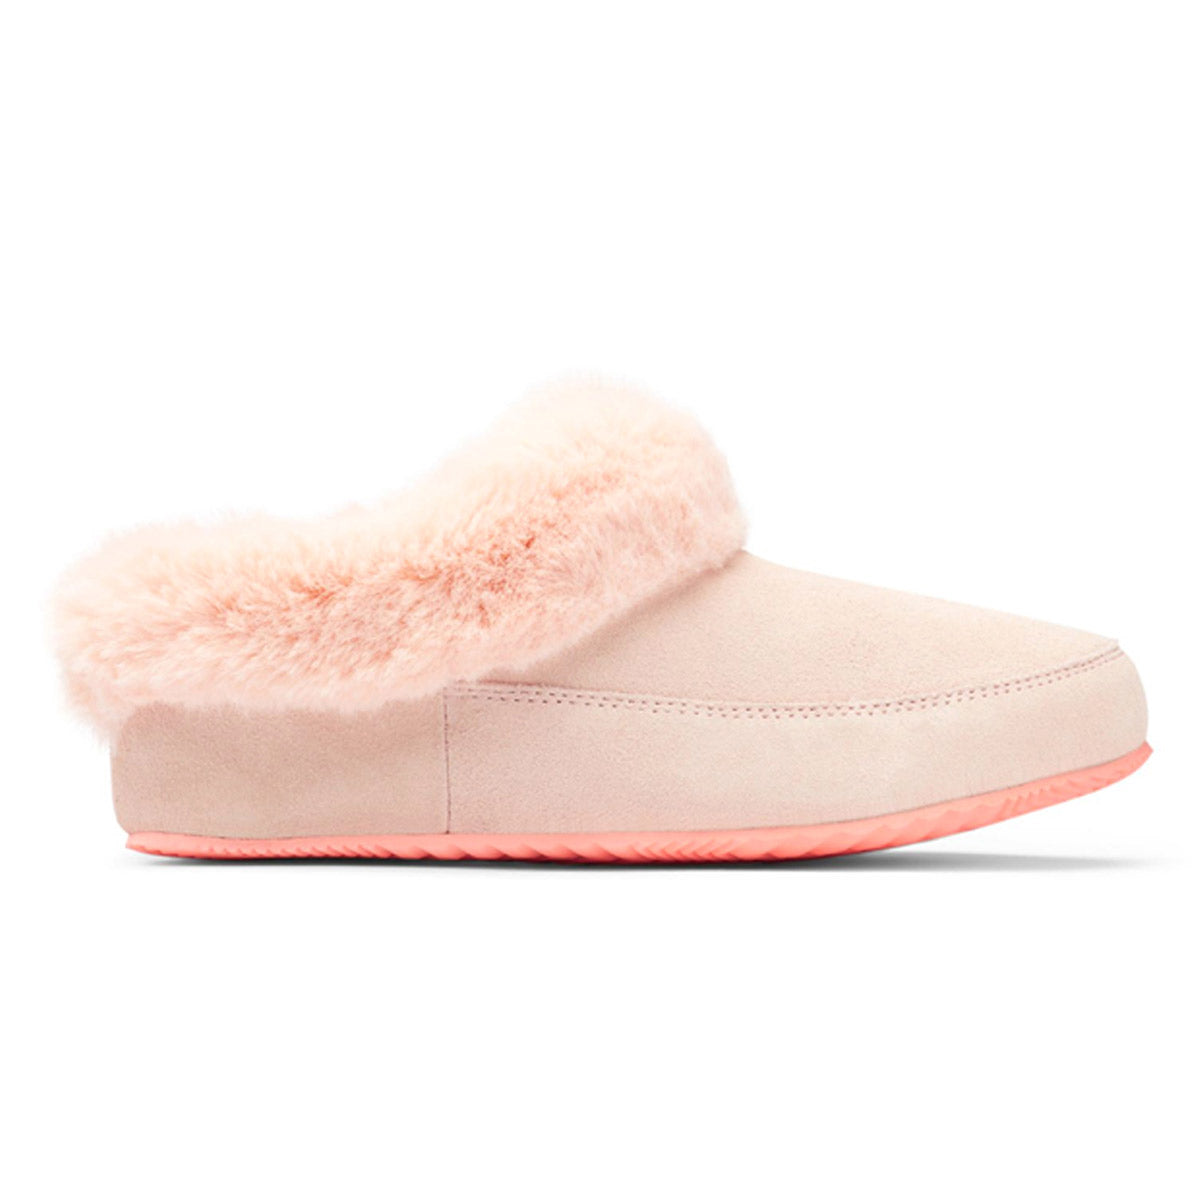 Beige slipper with plush faux fur lining and a coral sole. - SOREL GO COFFEE RUN PEACH BLOSSOM/CORAL GLOW - WOMENS by Sorel